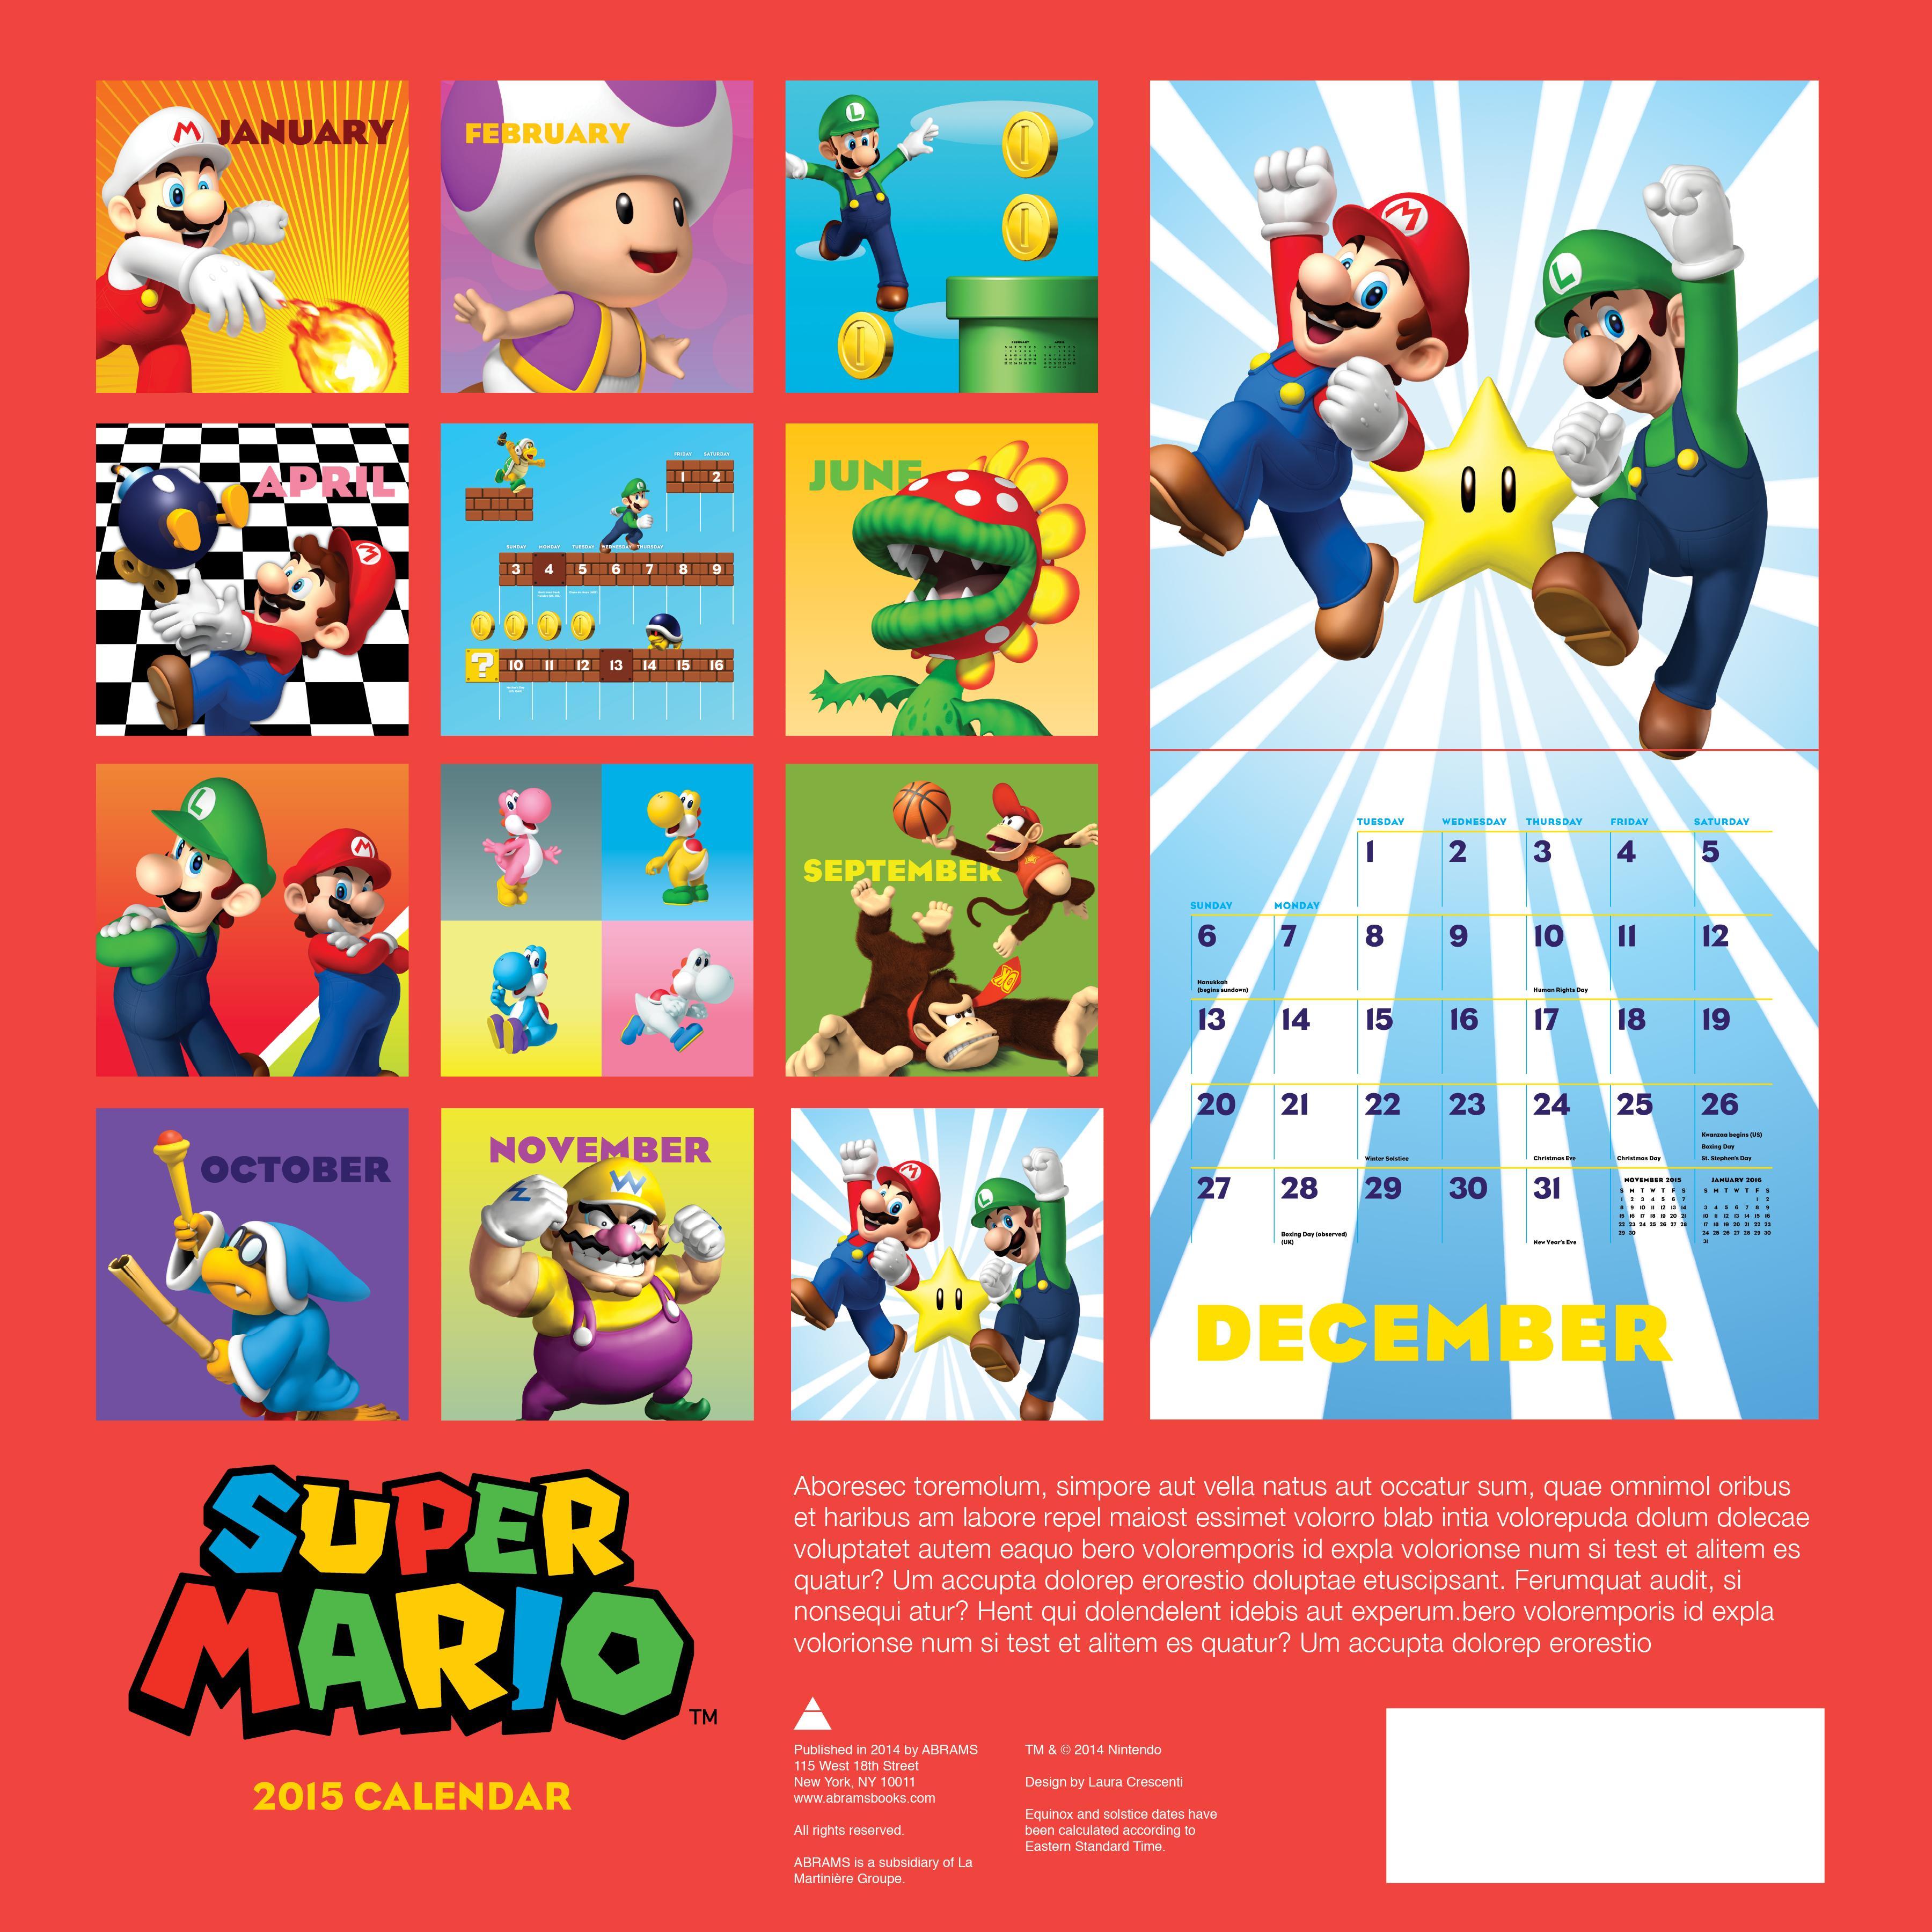 Fan Fiction competition - write a Super Mario story to win a 2015 Super